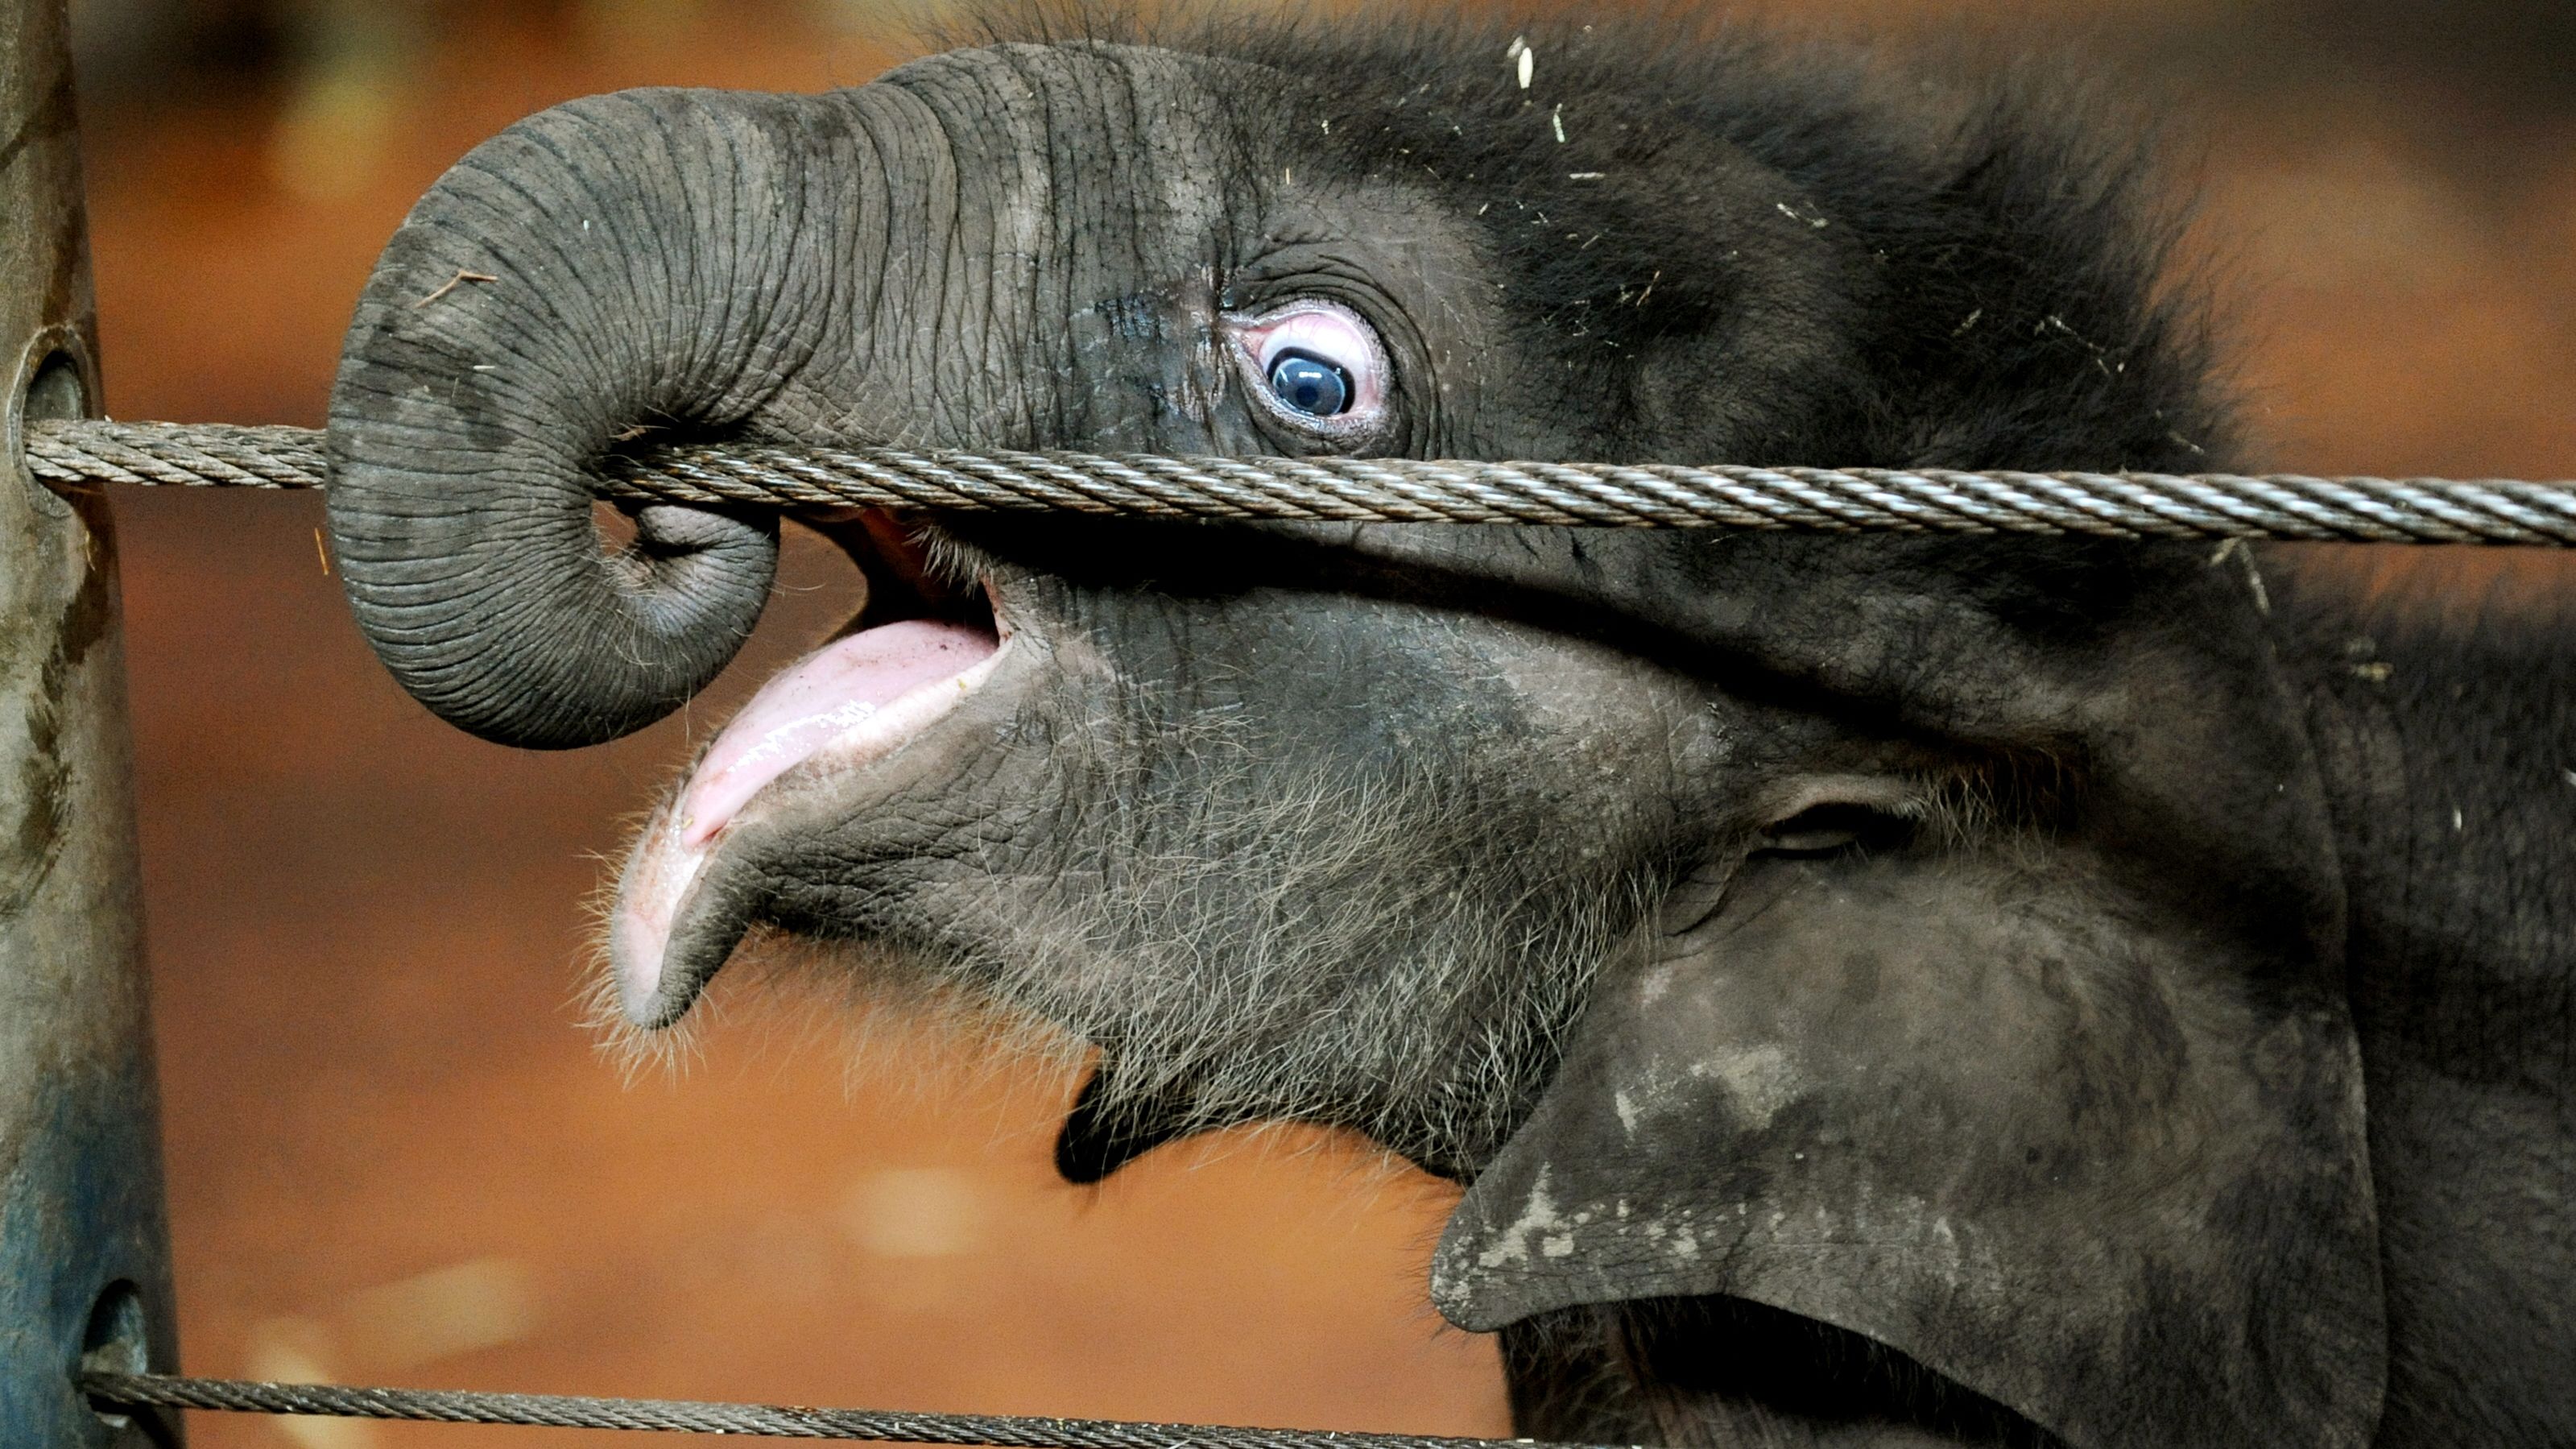 Pathi Harn wraps his trunk around a wire at Taronga Zoo in March 2010.